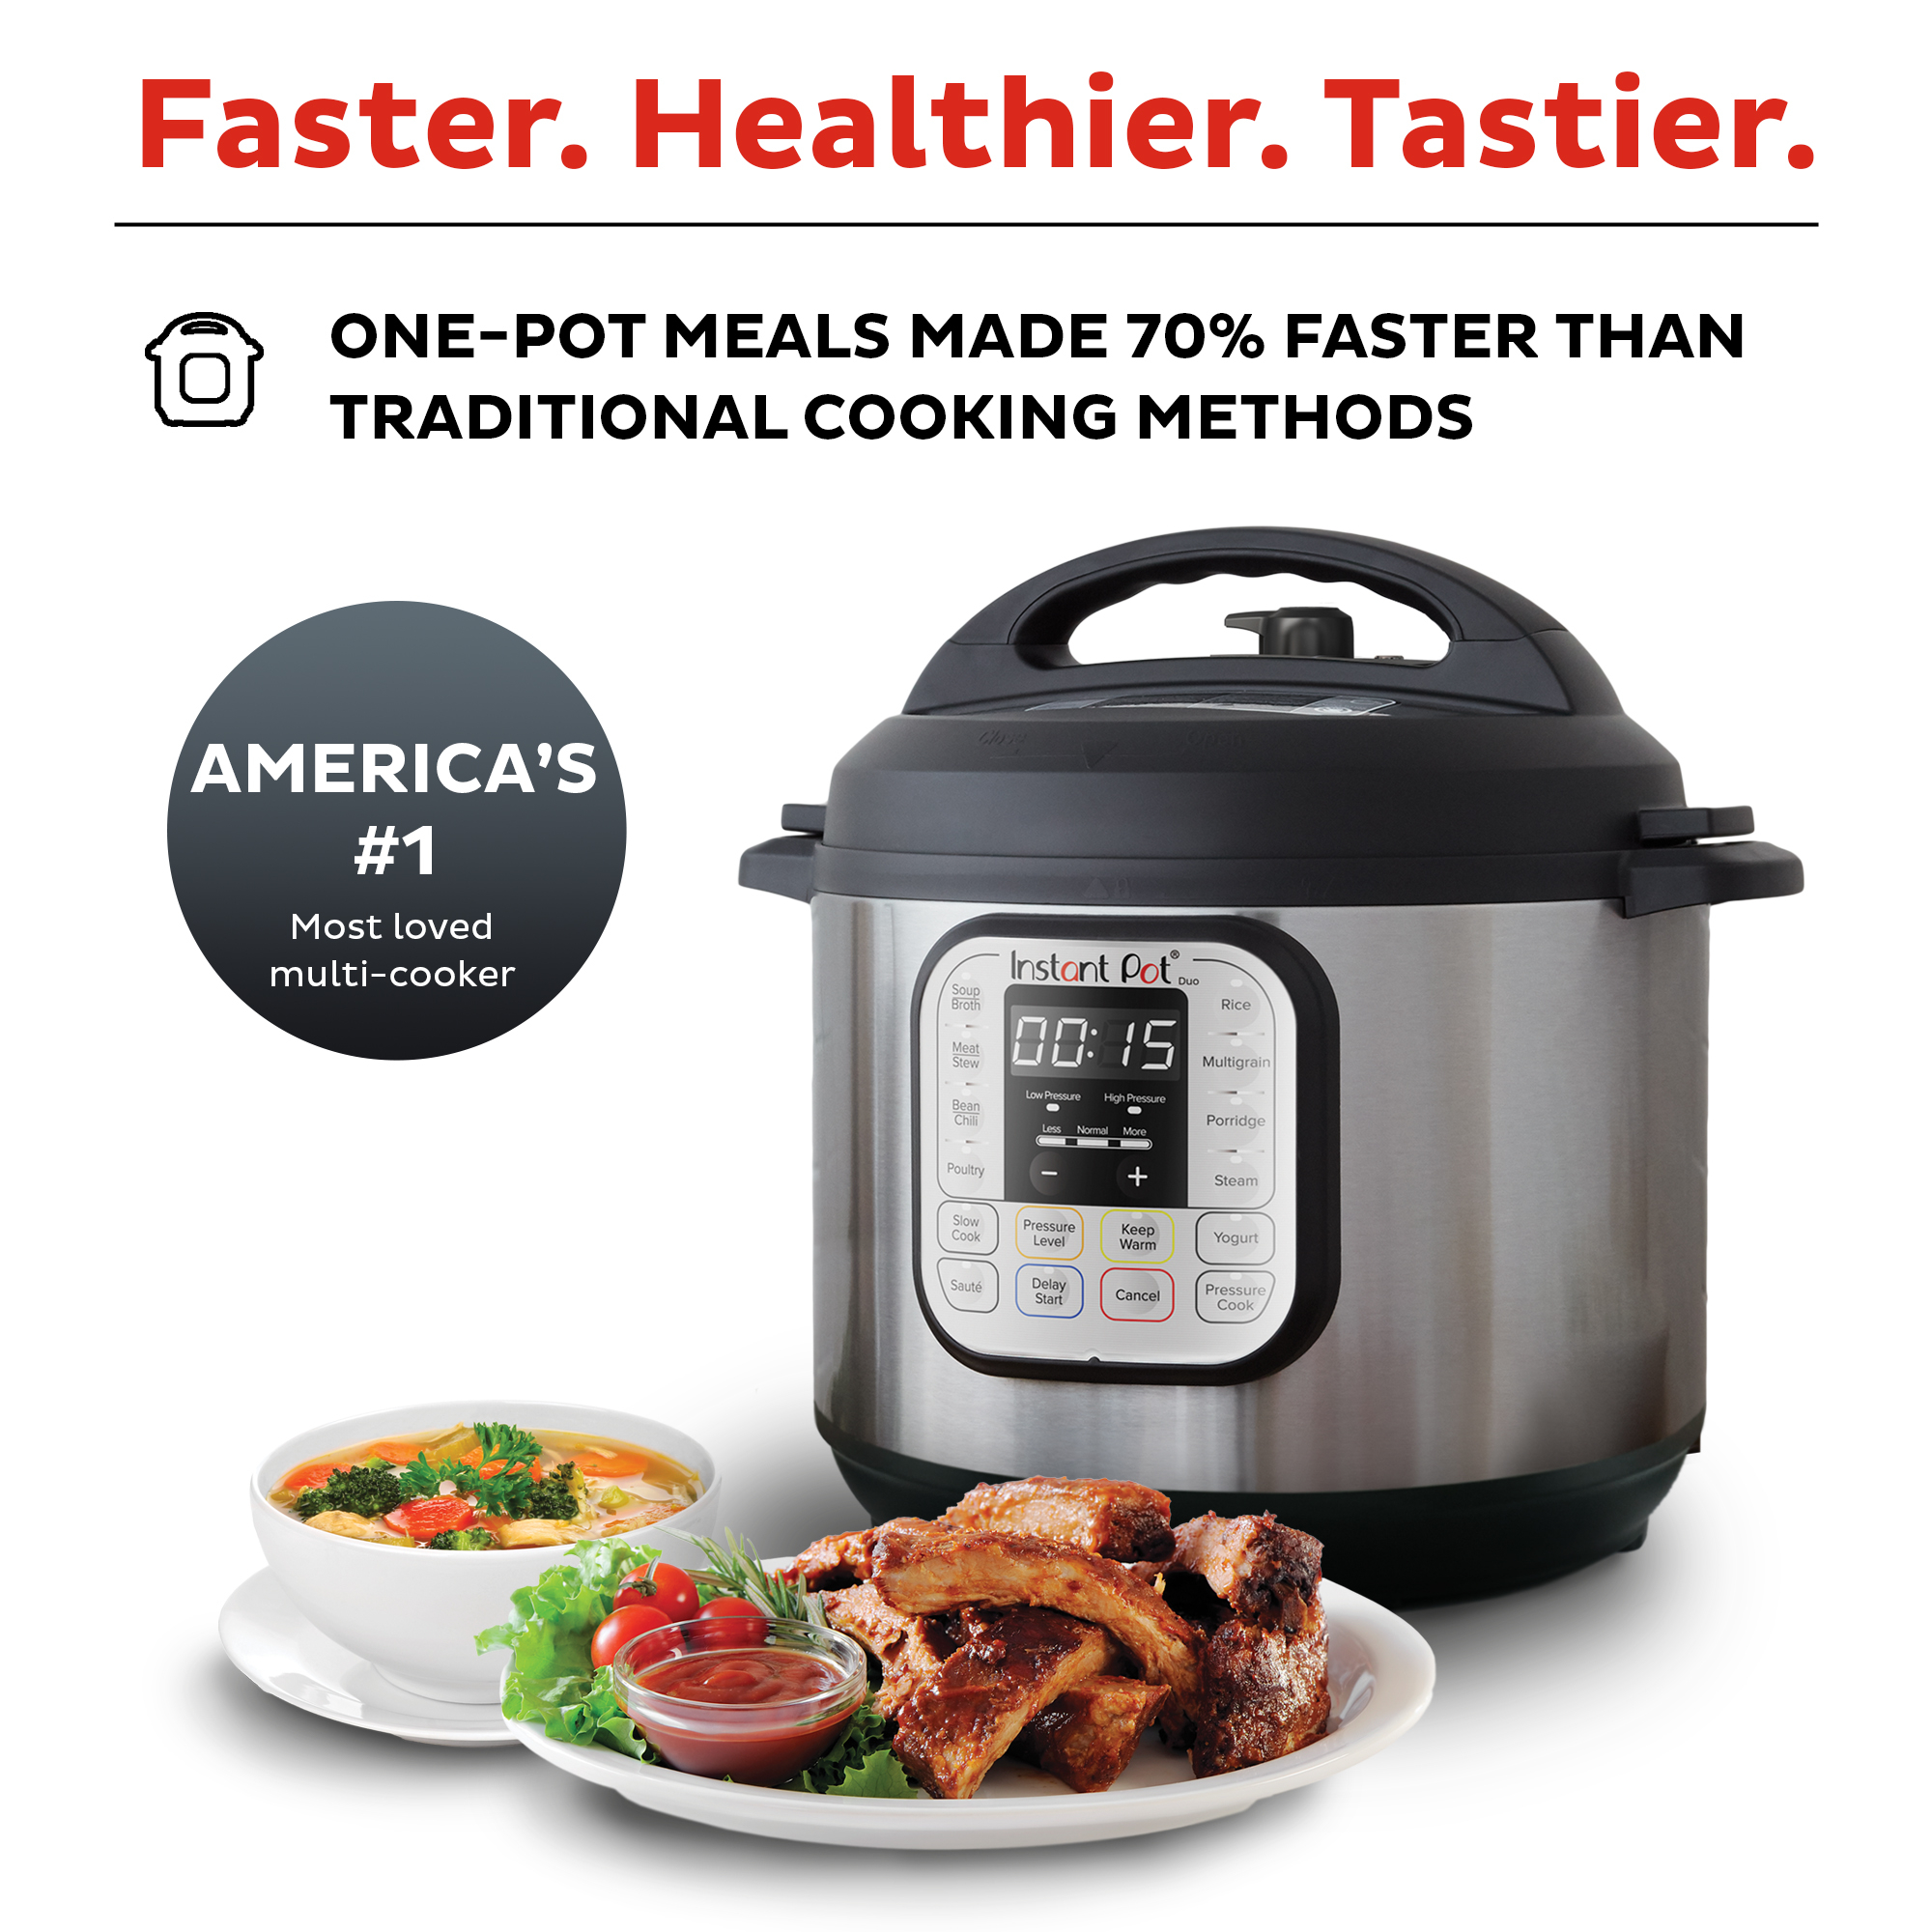 Instant Pot DUO60 V4 6-Quart Duo Electric Pressure Cooker/Slow Cooker - image 4 of 10